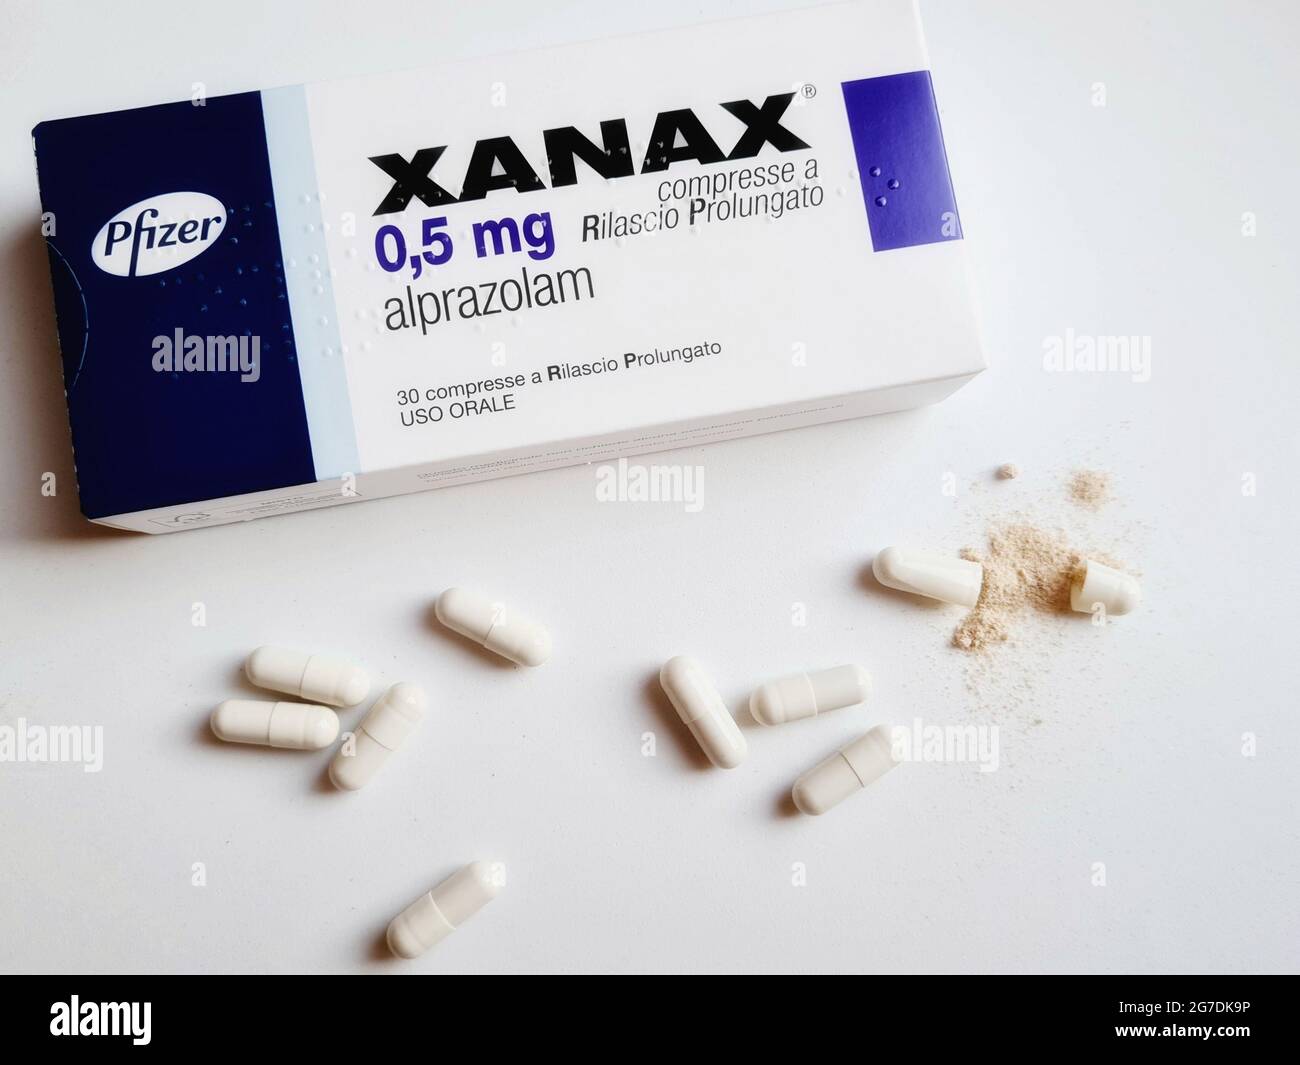 PESCARA, ITALY - Jun 15, 2021: A top view of a pack of Xanax capsules on a  white surface Stock Photo - Alamy